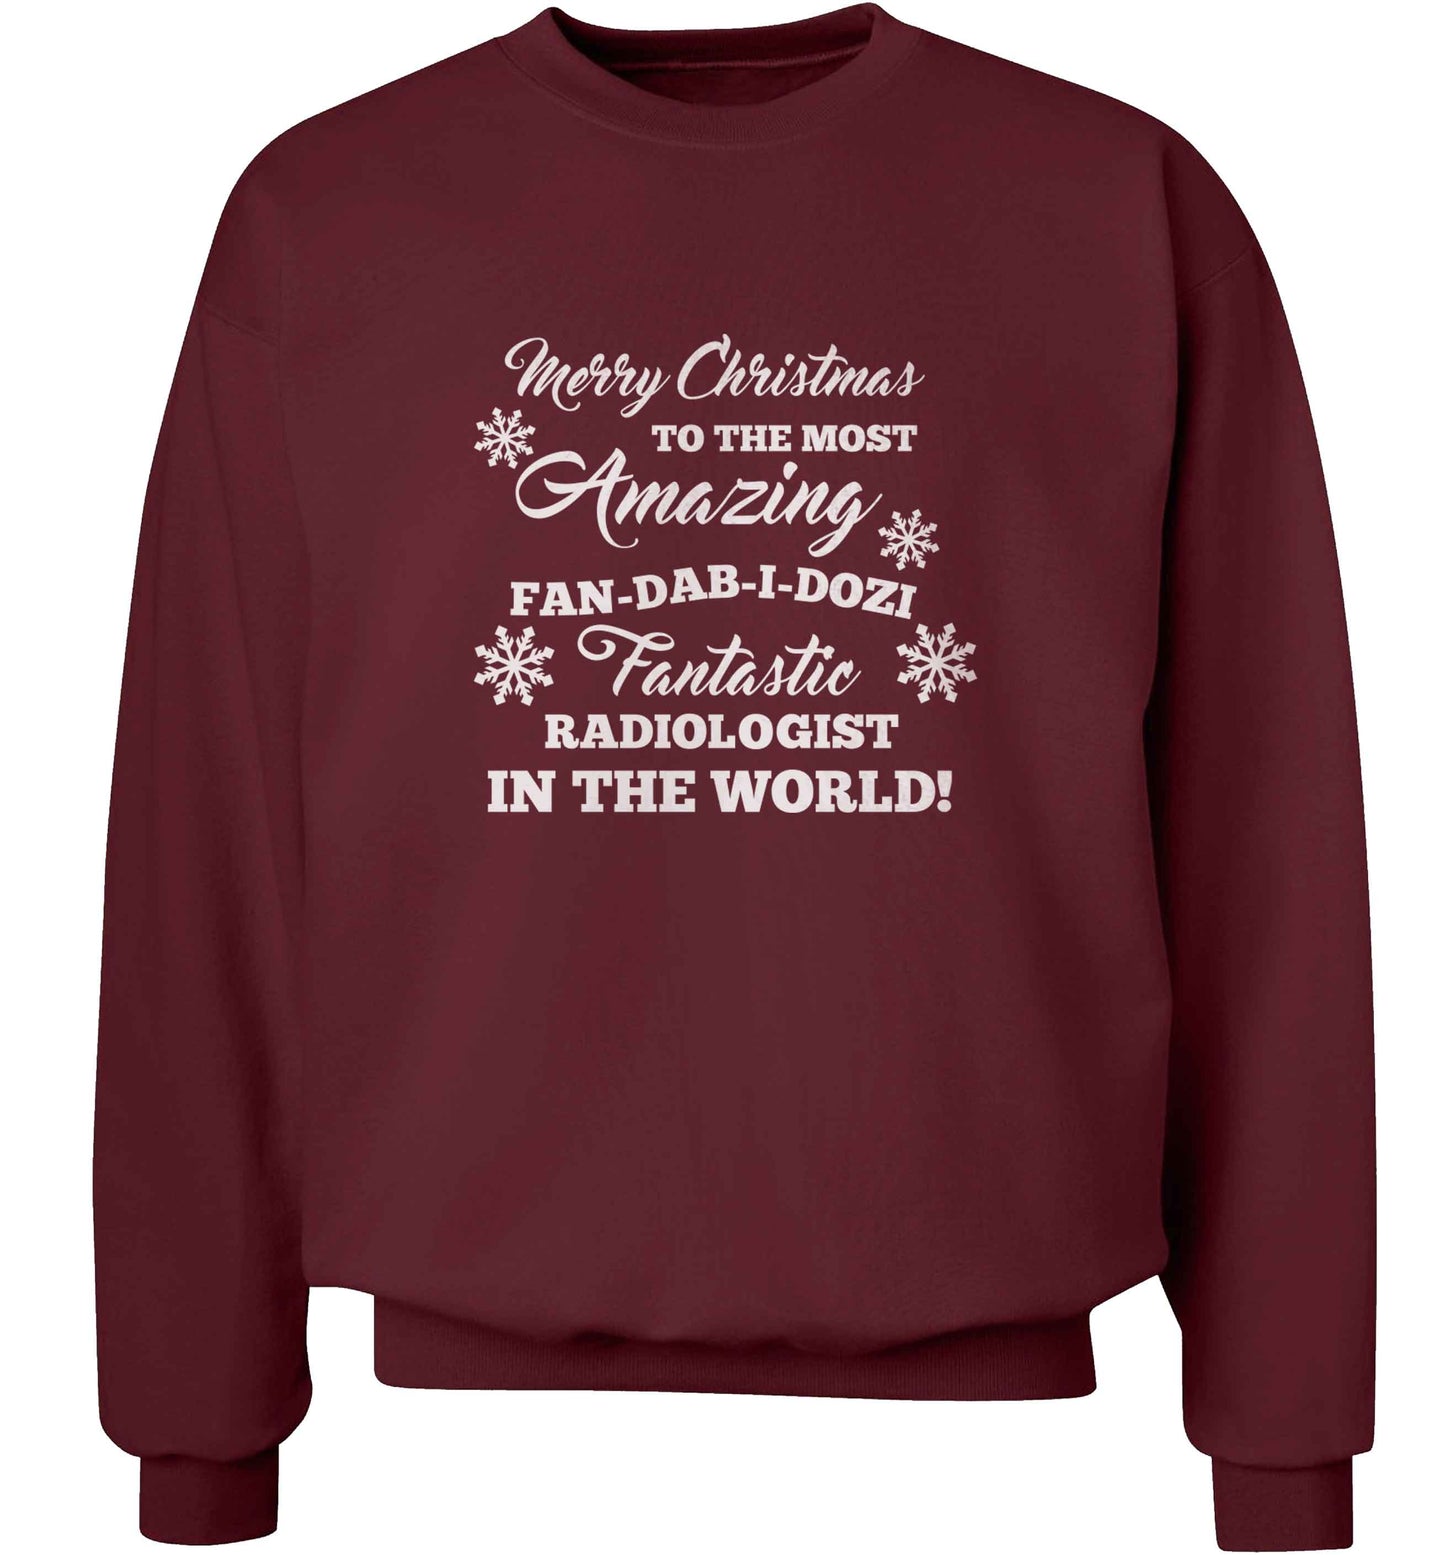 Merry Christmas to the most amazing radiologist in the world! adult's unisex maroon sweater 2XL